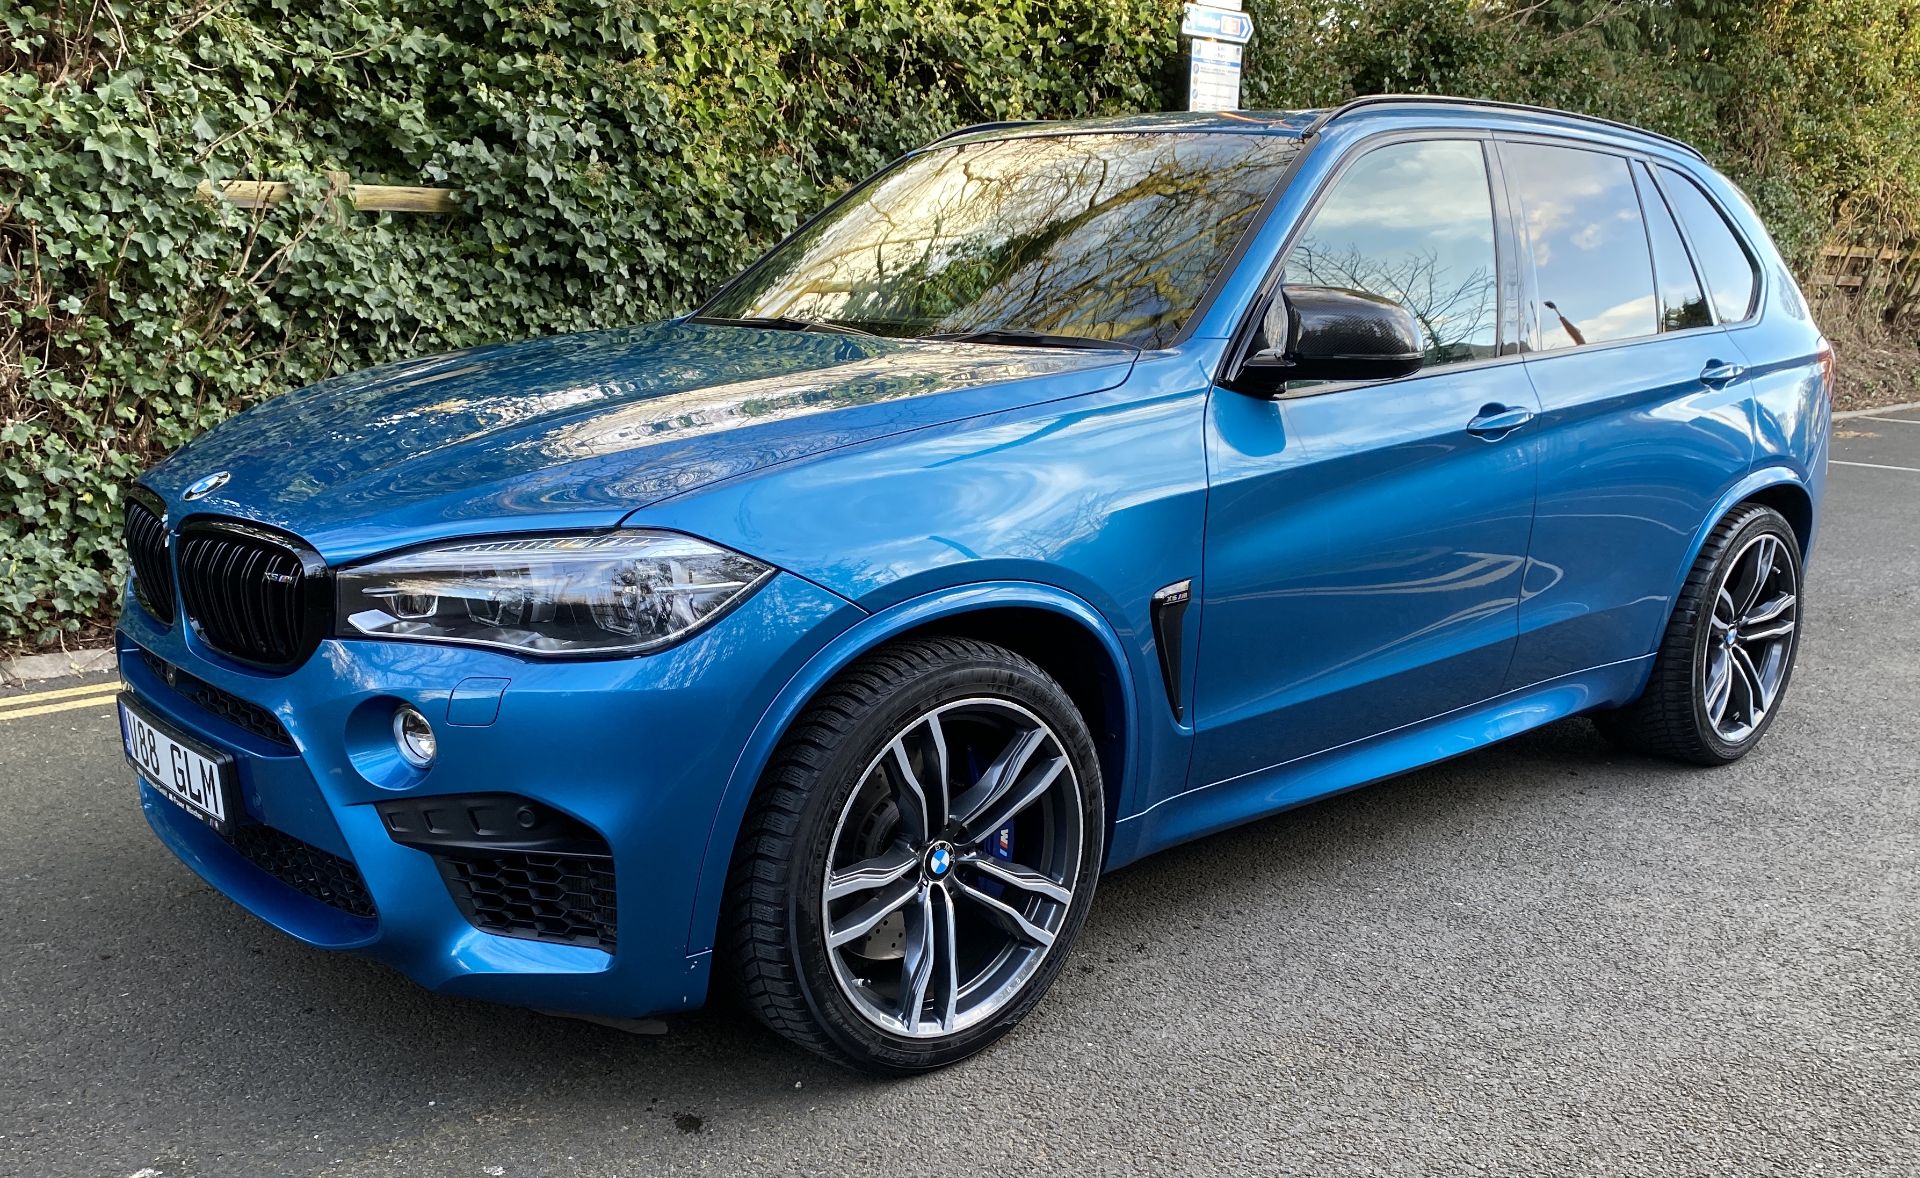 BMW X5 M - 2017 Fully Loaded Example Cost Over £100,000 When New £8k Options Fitted - Image 3 of 66